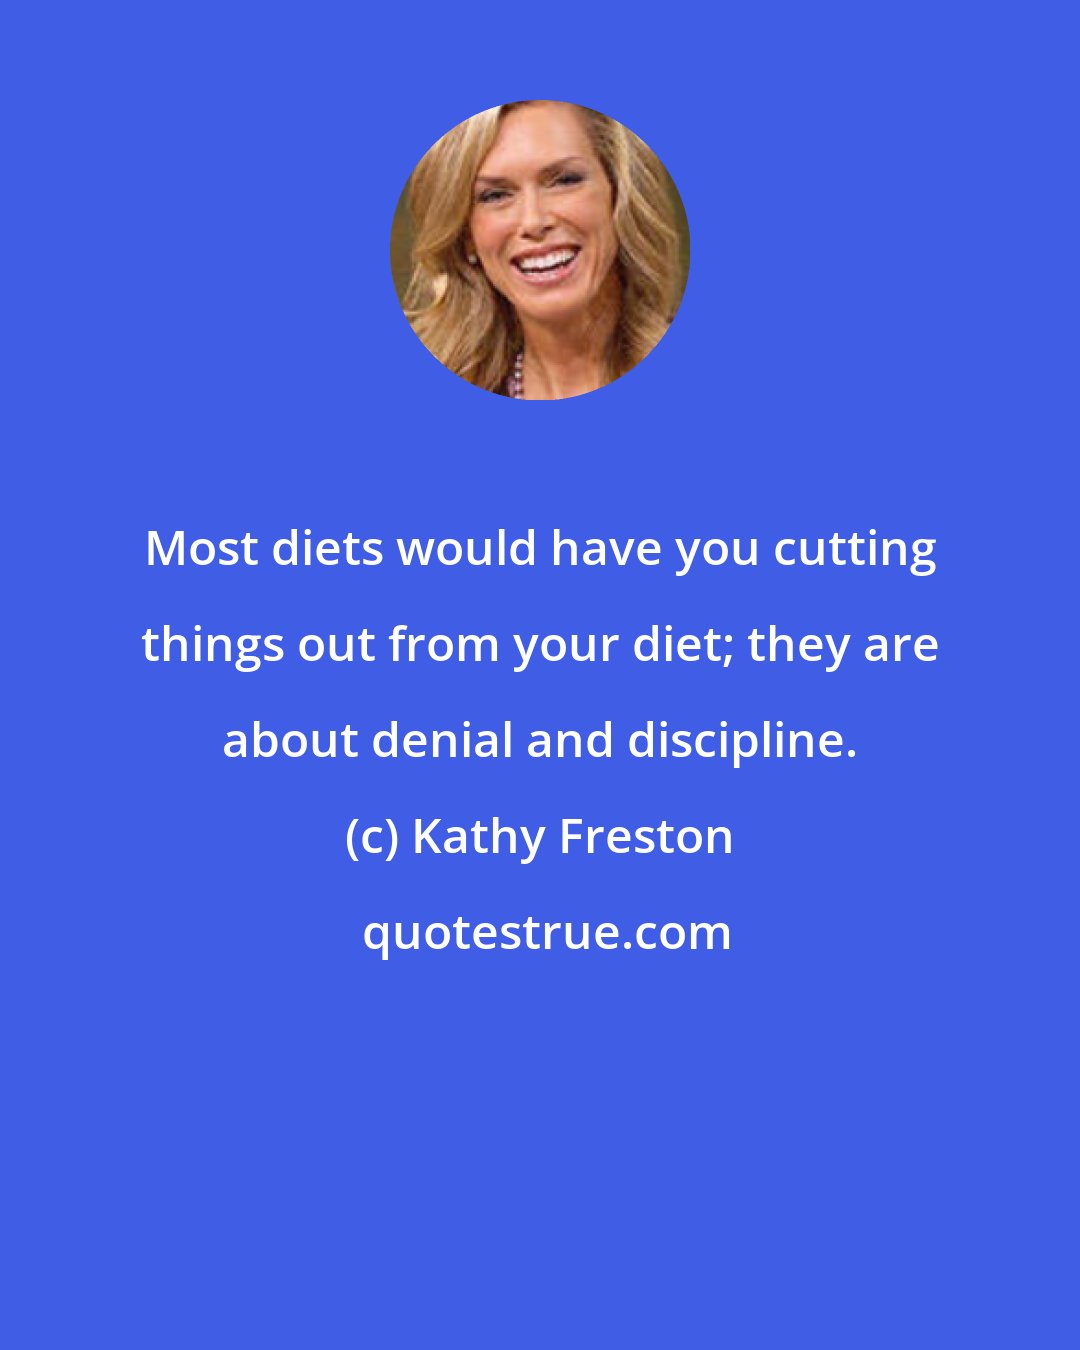 Kathy Freston: Most diets would have you cutting things out from your diet; they are about denial and discipline.